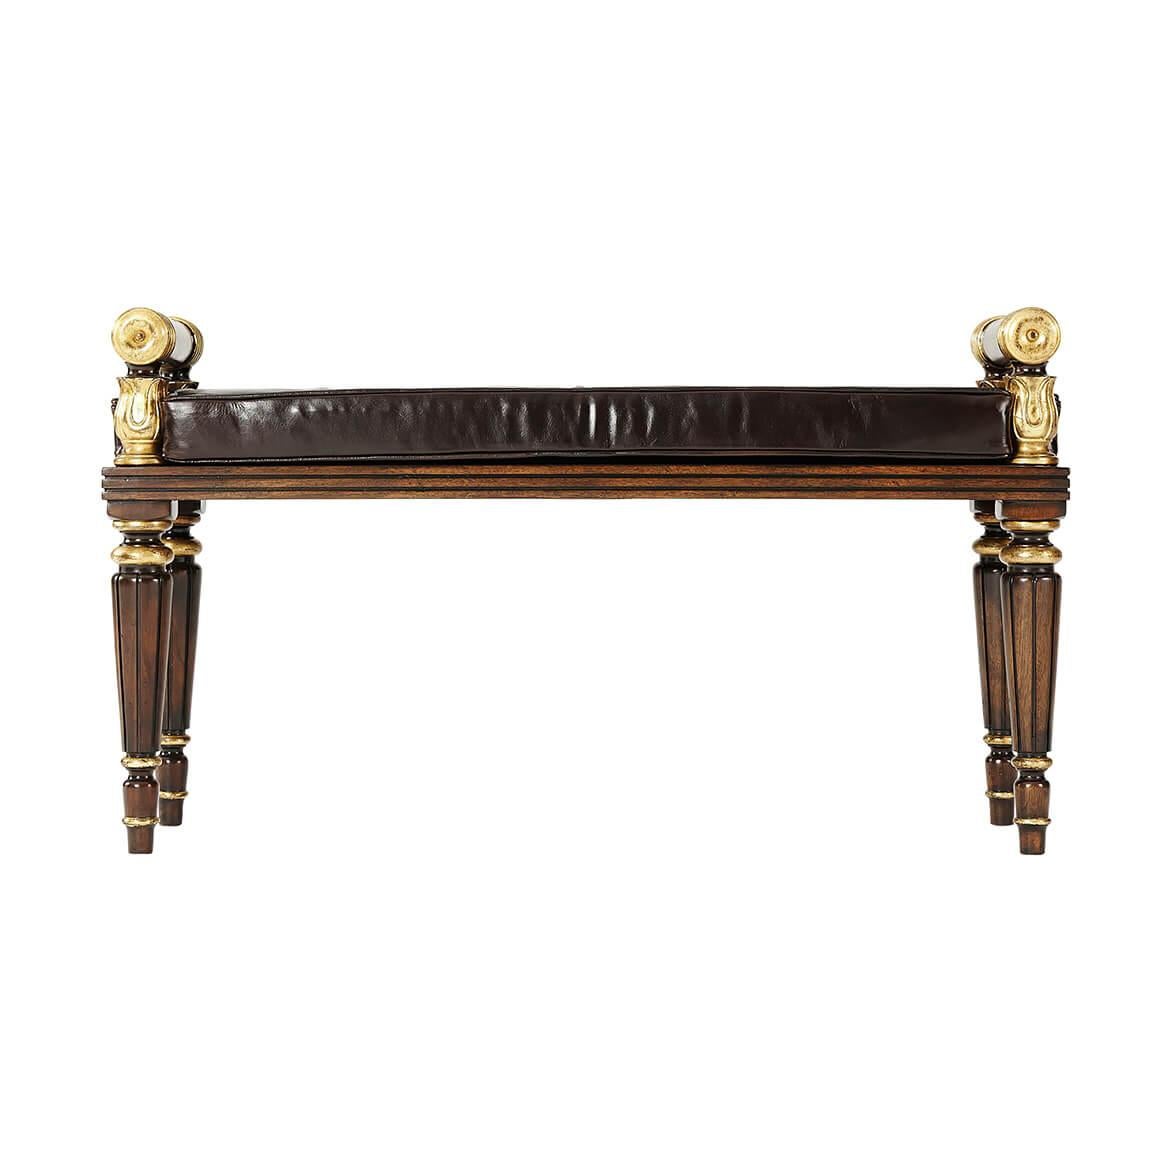 A Regency style carved mahogany and parcel-gilt hall bench, the reeded solid seat with lapette carved and scroll end supports, loose button upholstered seat cushion, on turned fluted and tapering legs. In the manner of George Bullock.